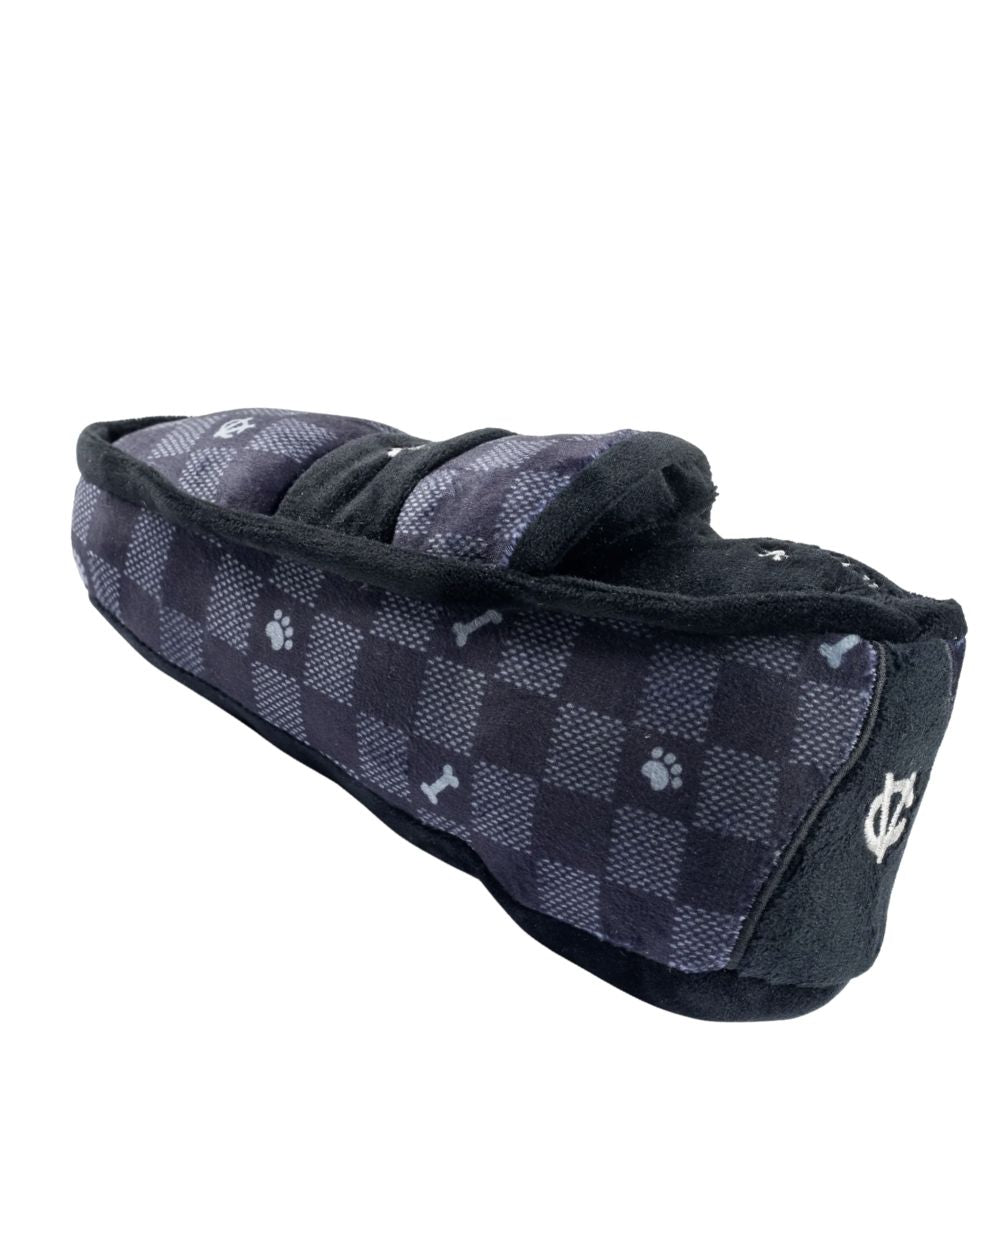 Black Checker Chewy Vuiton Loafer Dog Toy